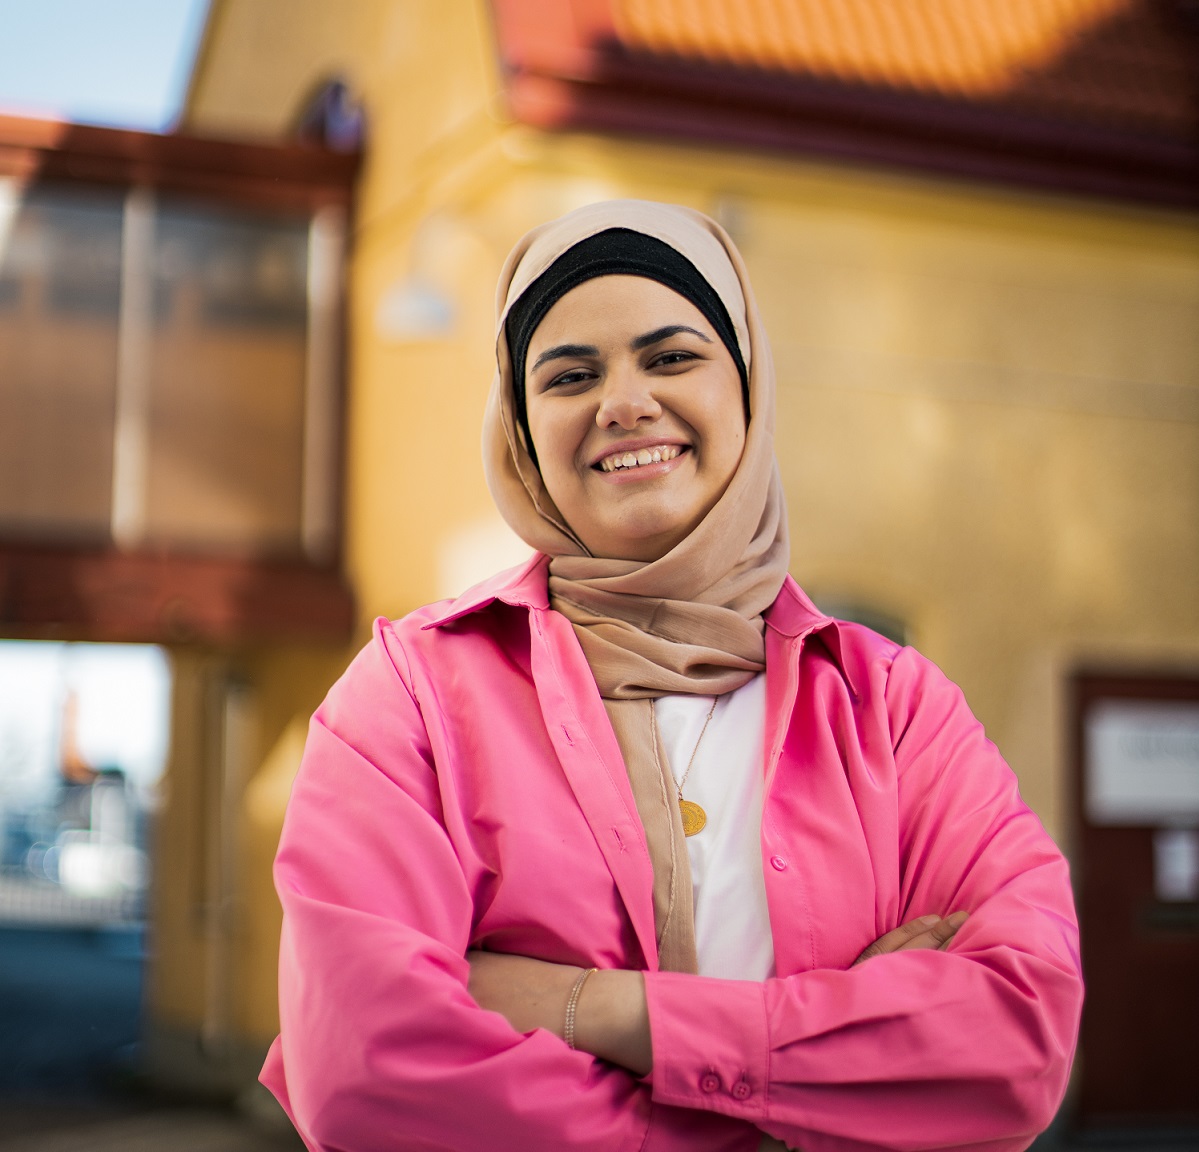 Young woman wearing peach-coloured hijab and a pink jacket smiles at the camera in front of yellow building.